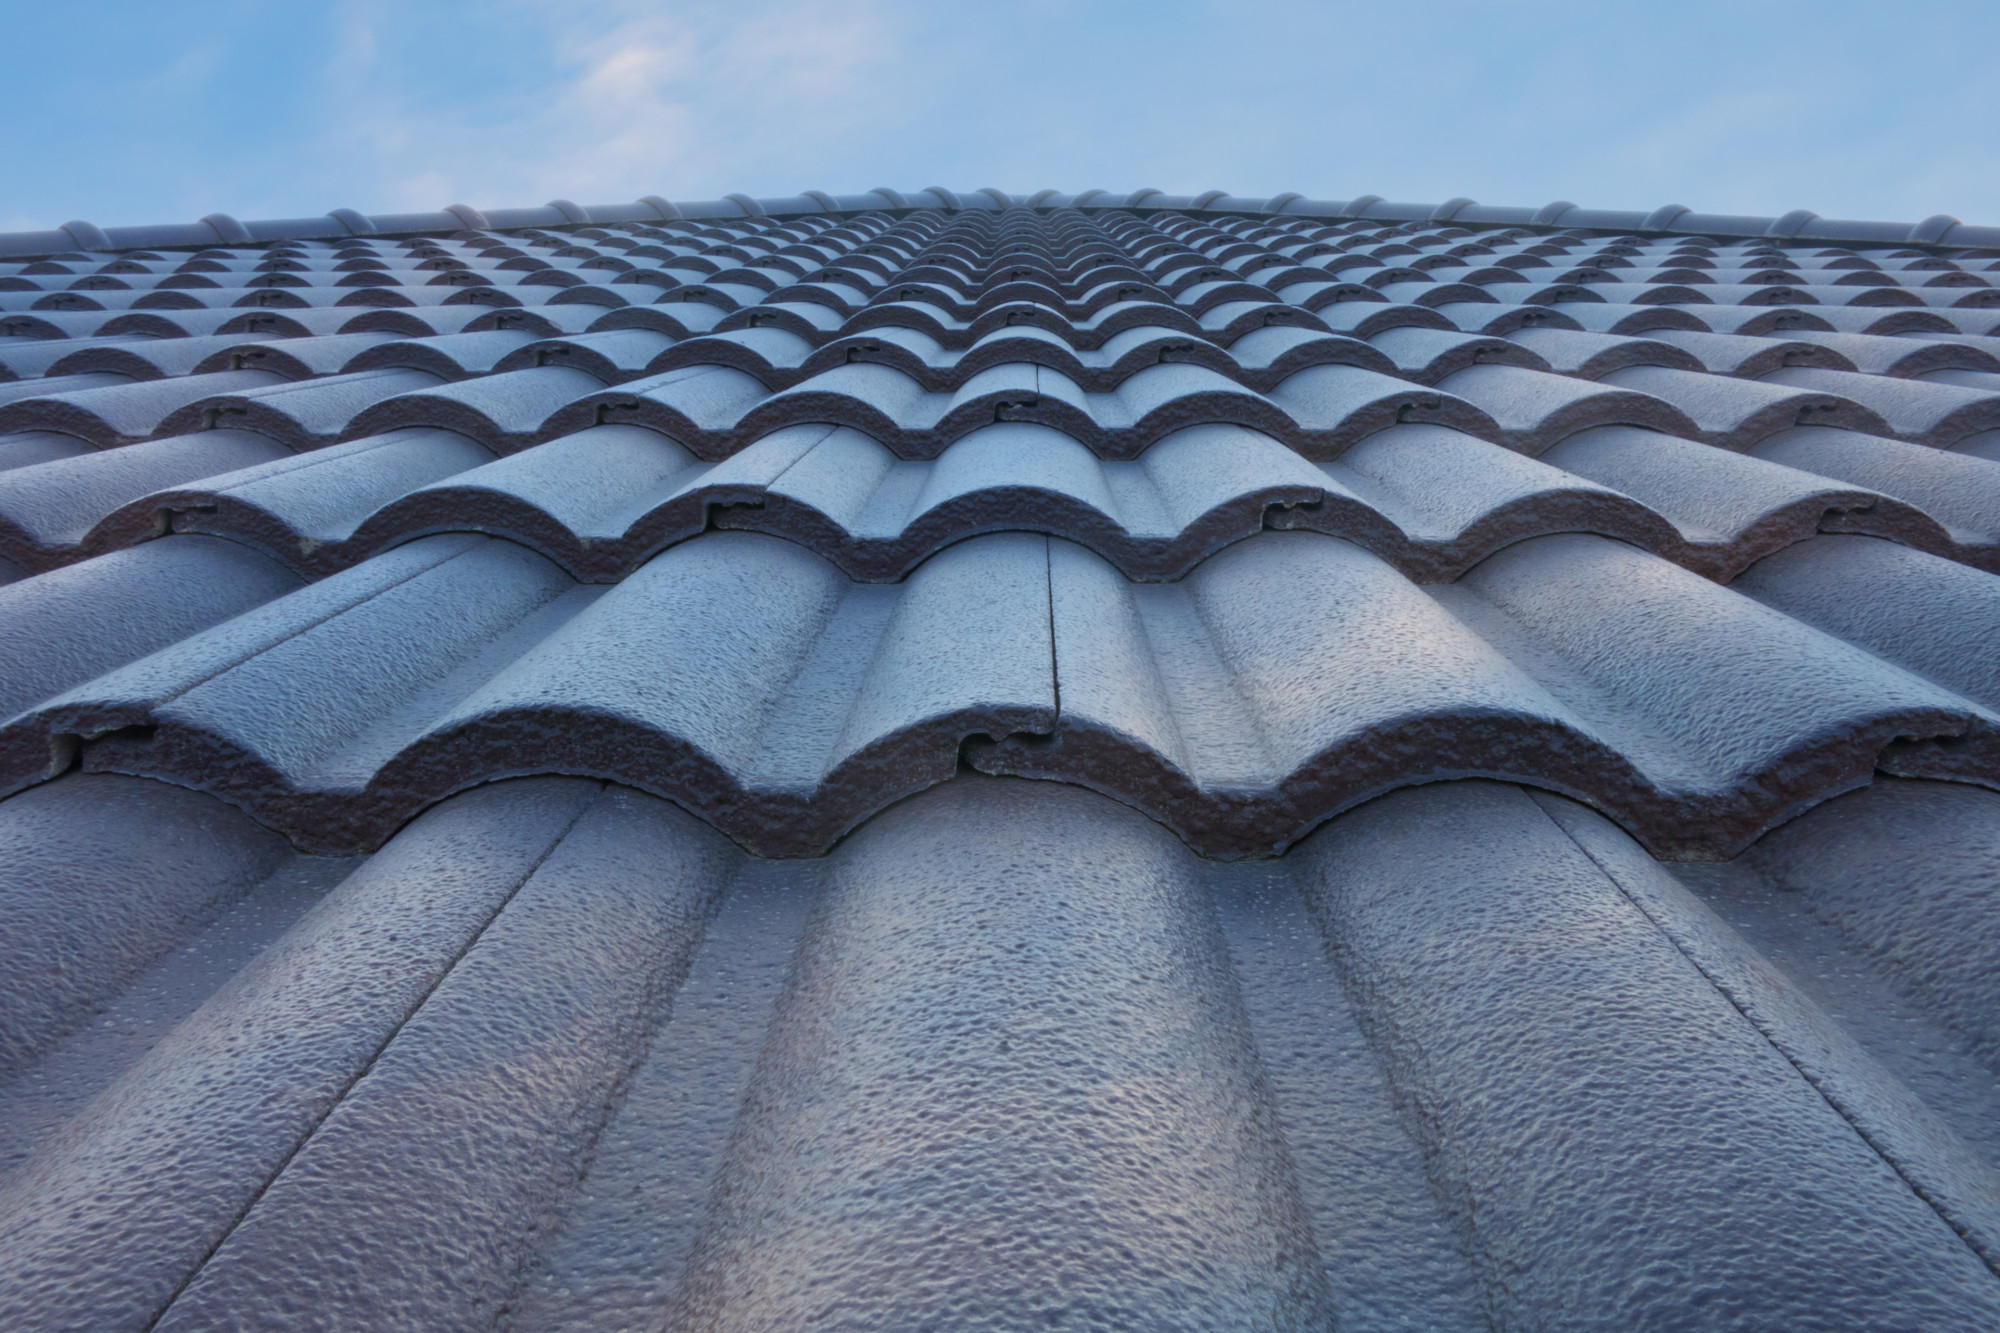 Concrete is a very durable roofing material